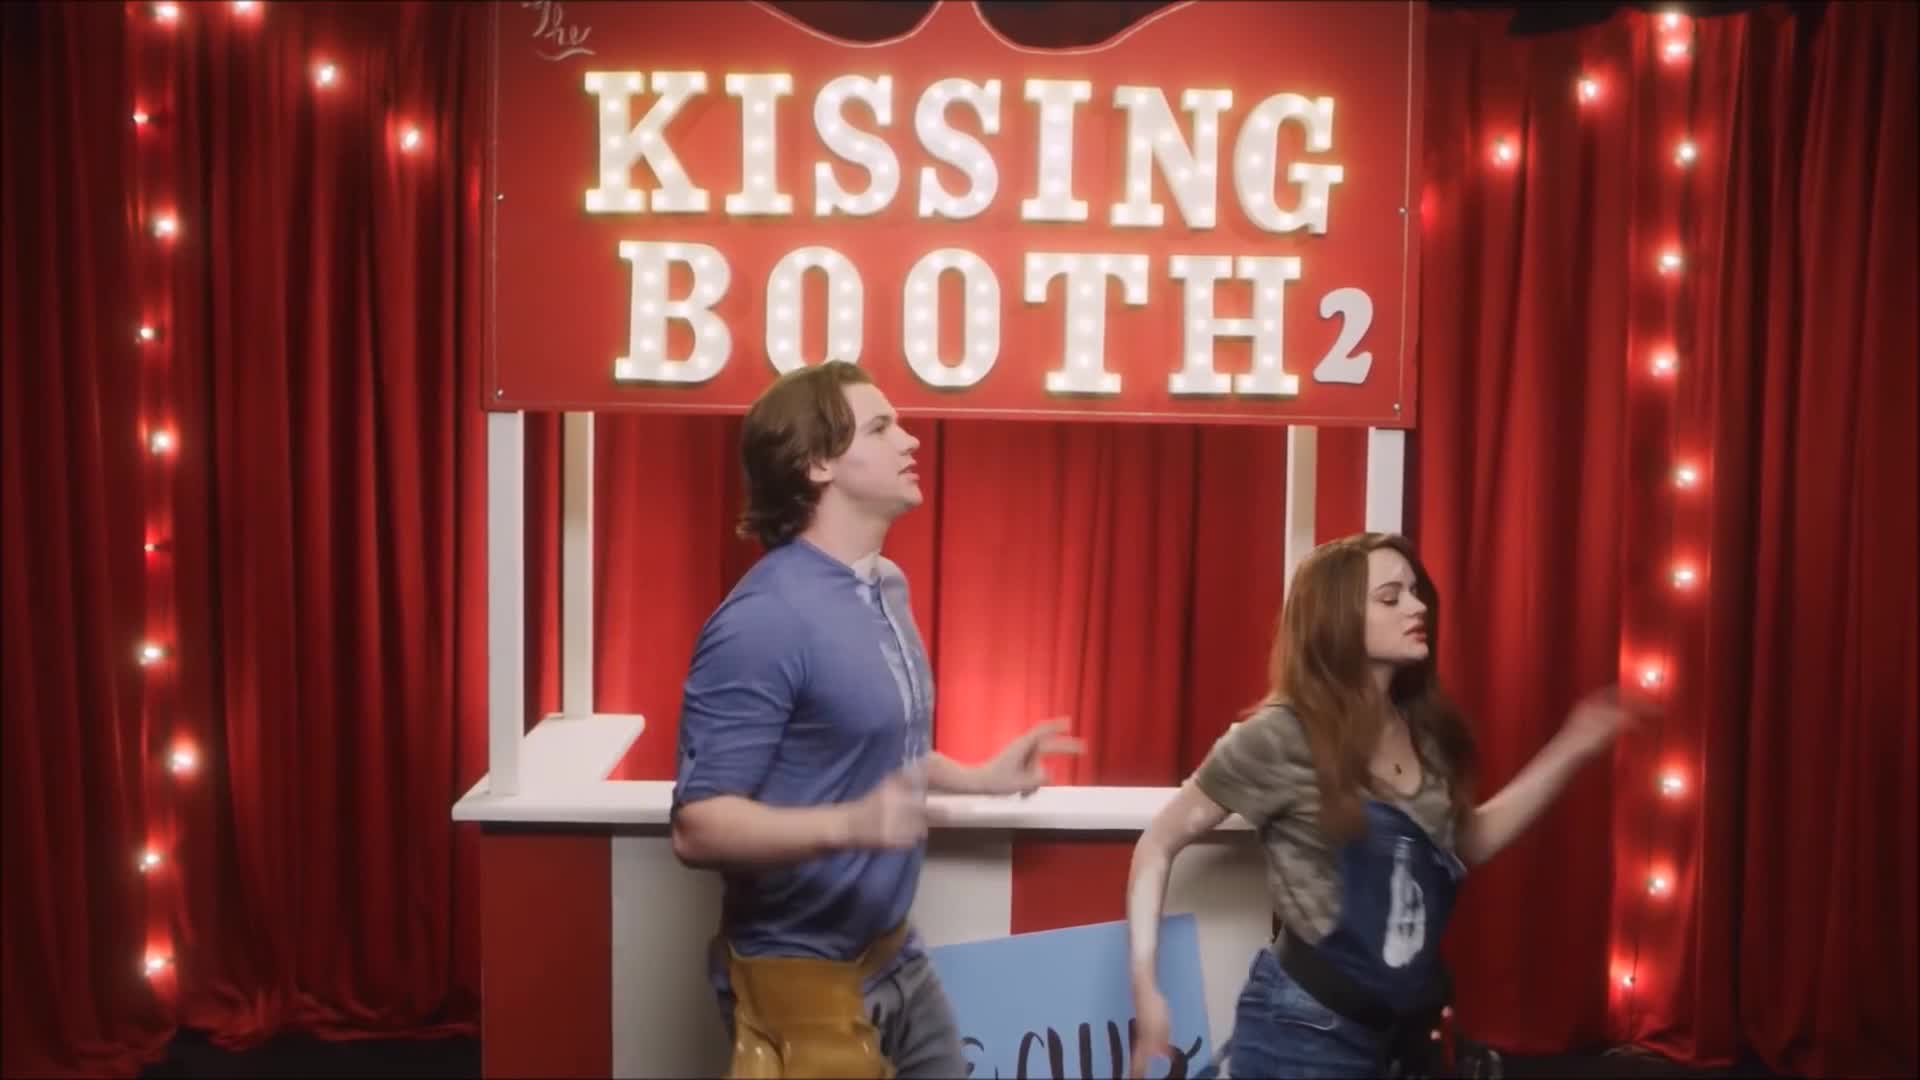 The Kissing Booth 2 update